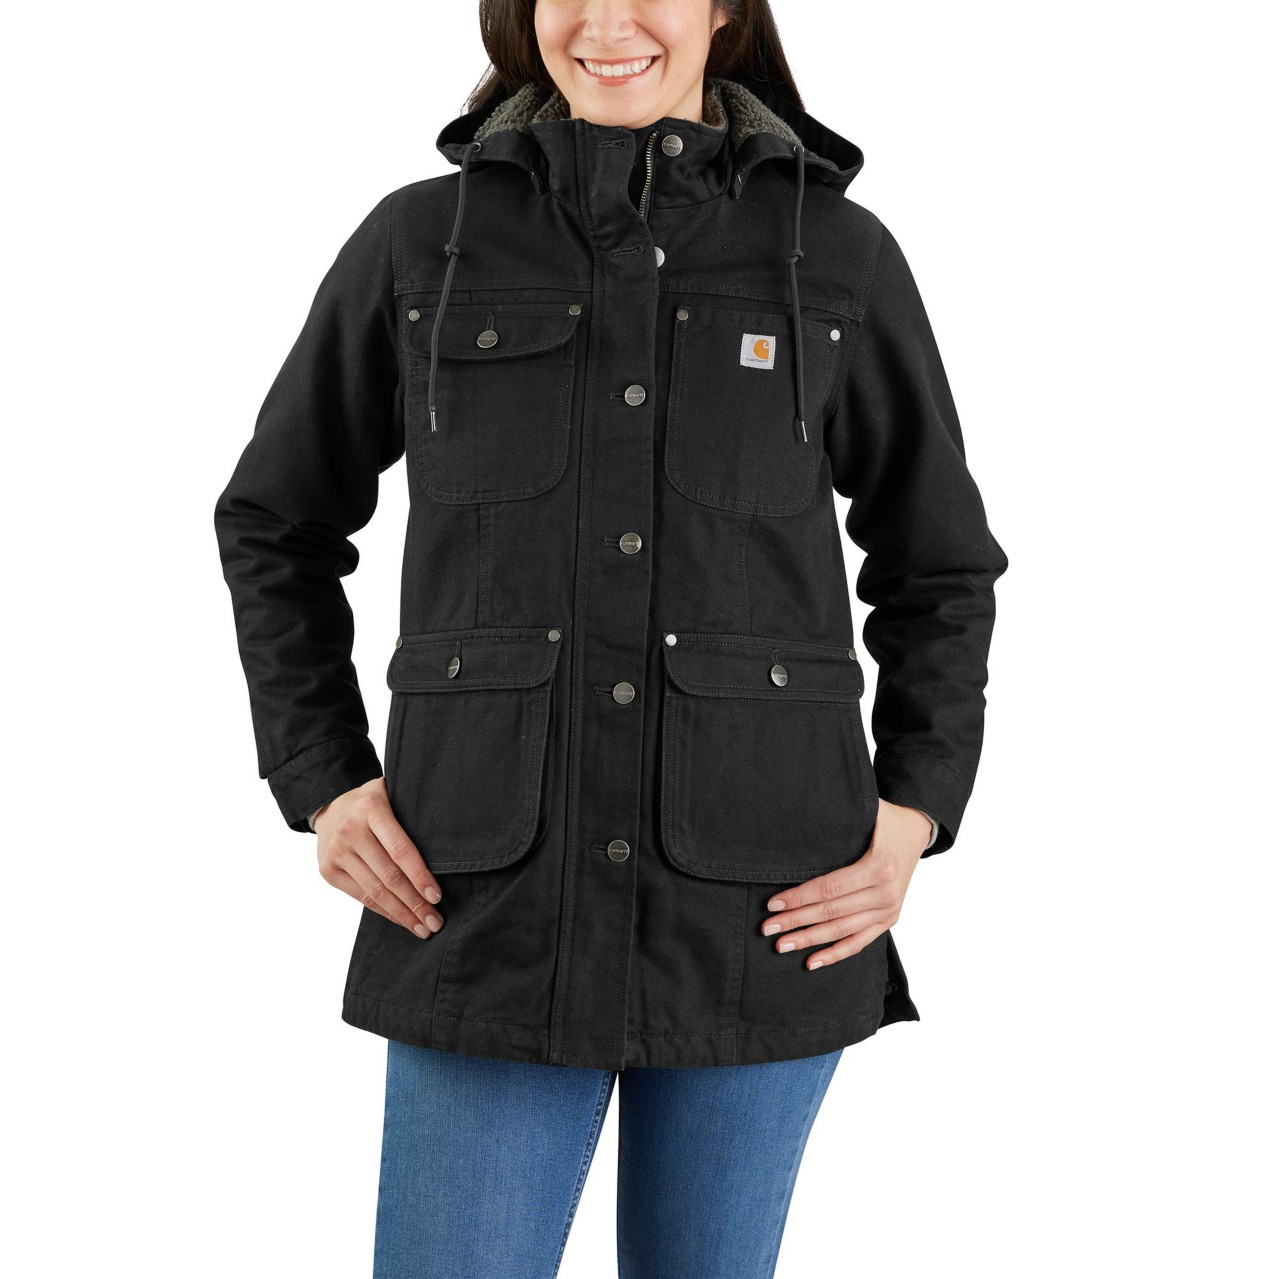 Image of woman in coat links to all women's coats and jackets catalog